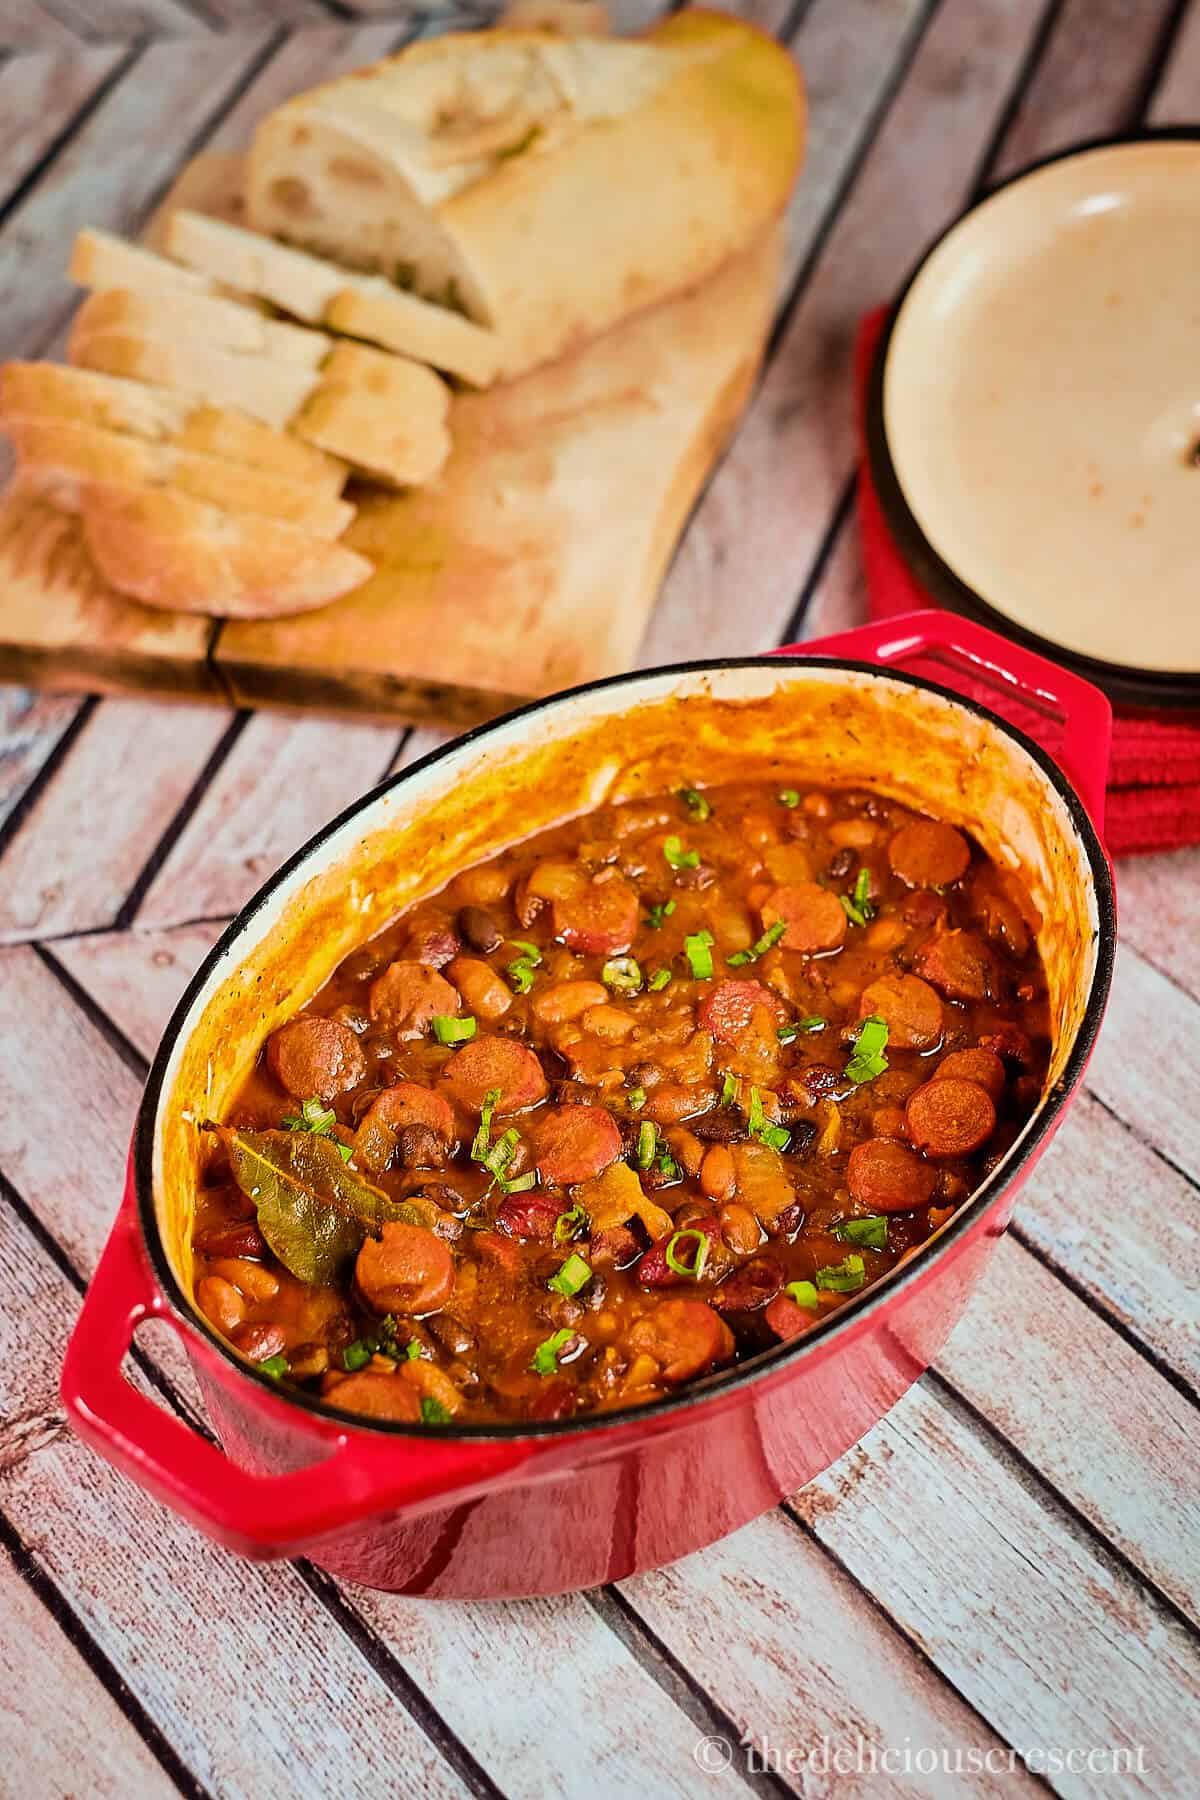 Bean stew cooked with sausage and served in a dutch oven.